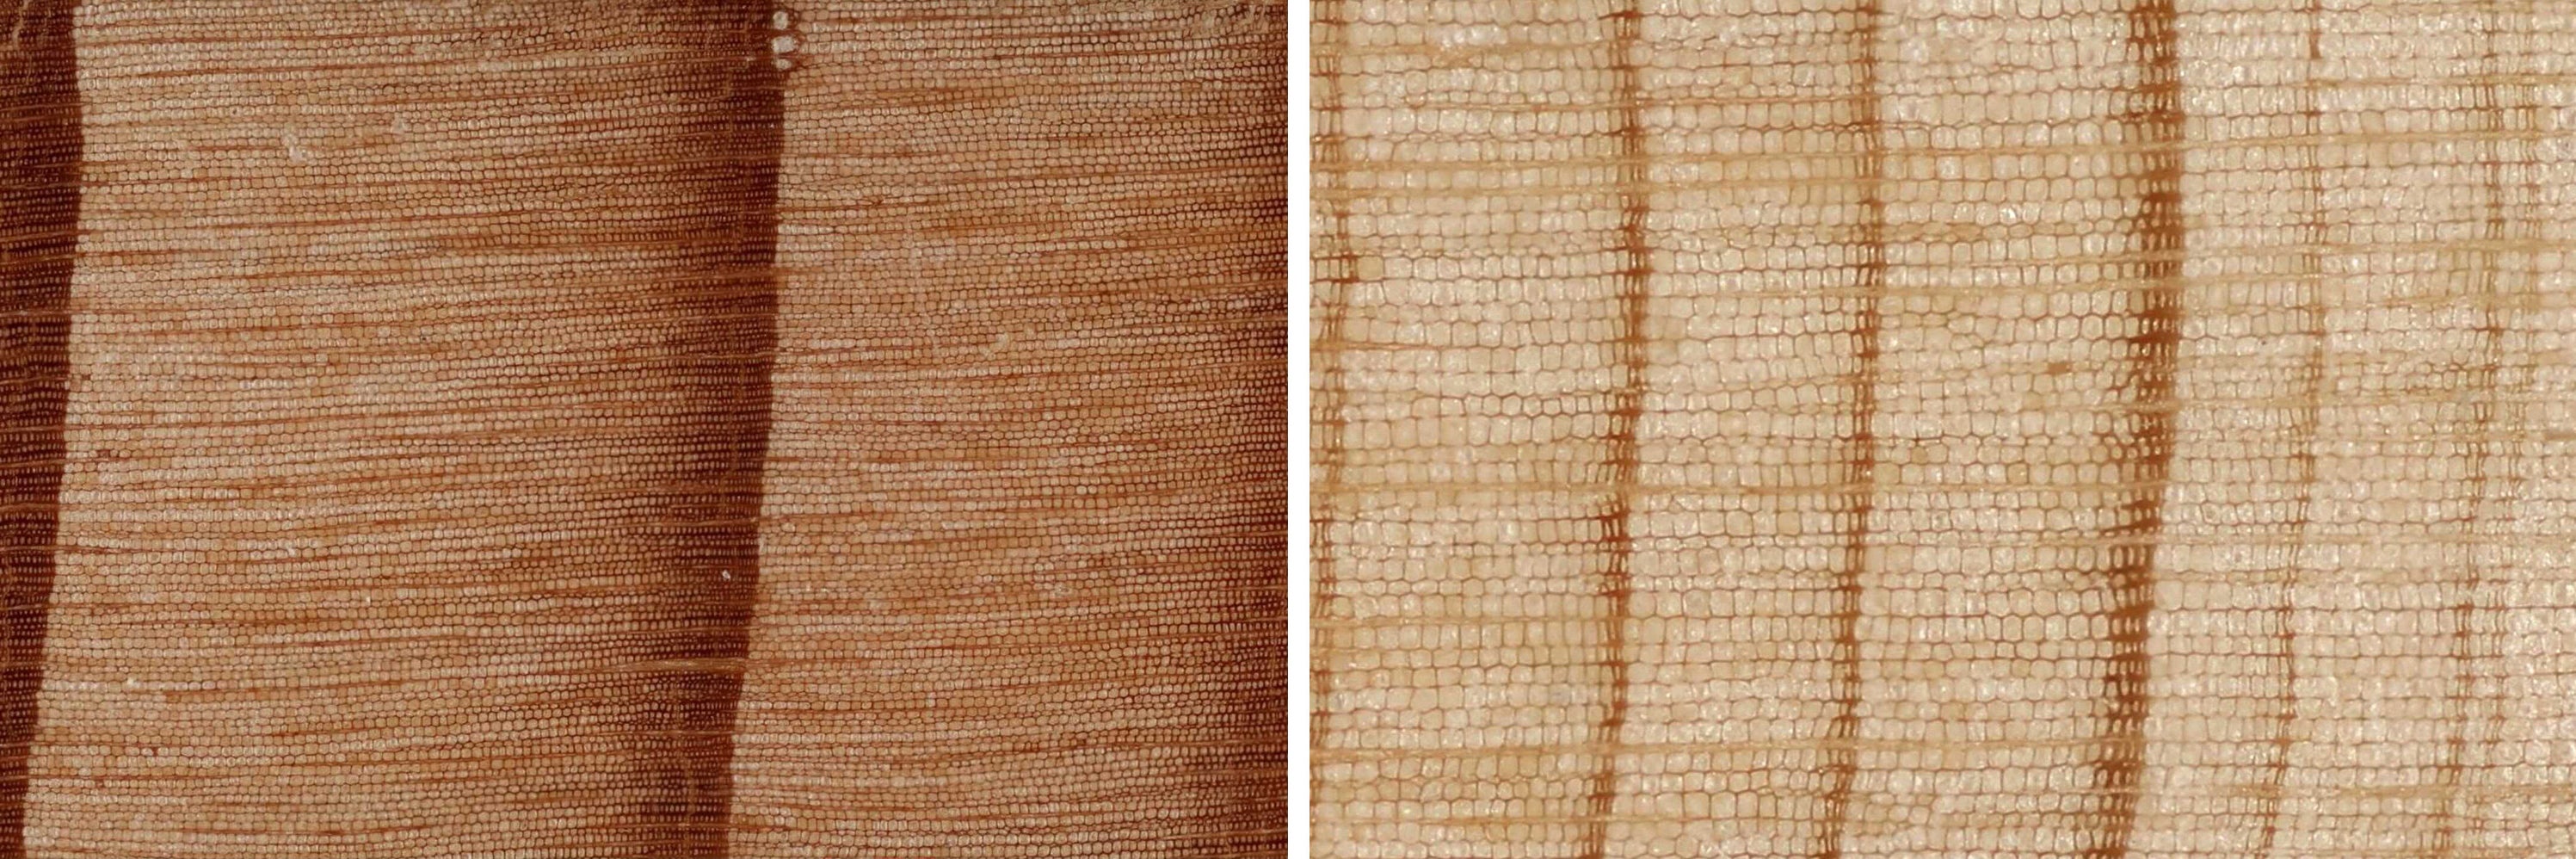 Tree ring scans showing the impact of the drought – trees grow significantly less in times of drought